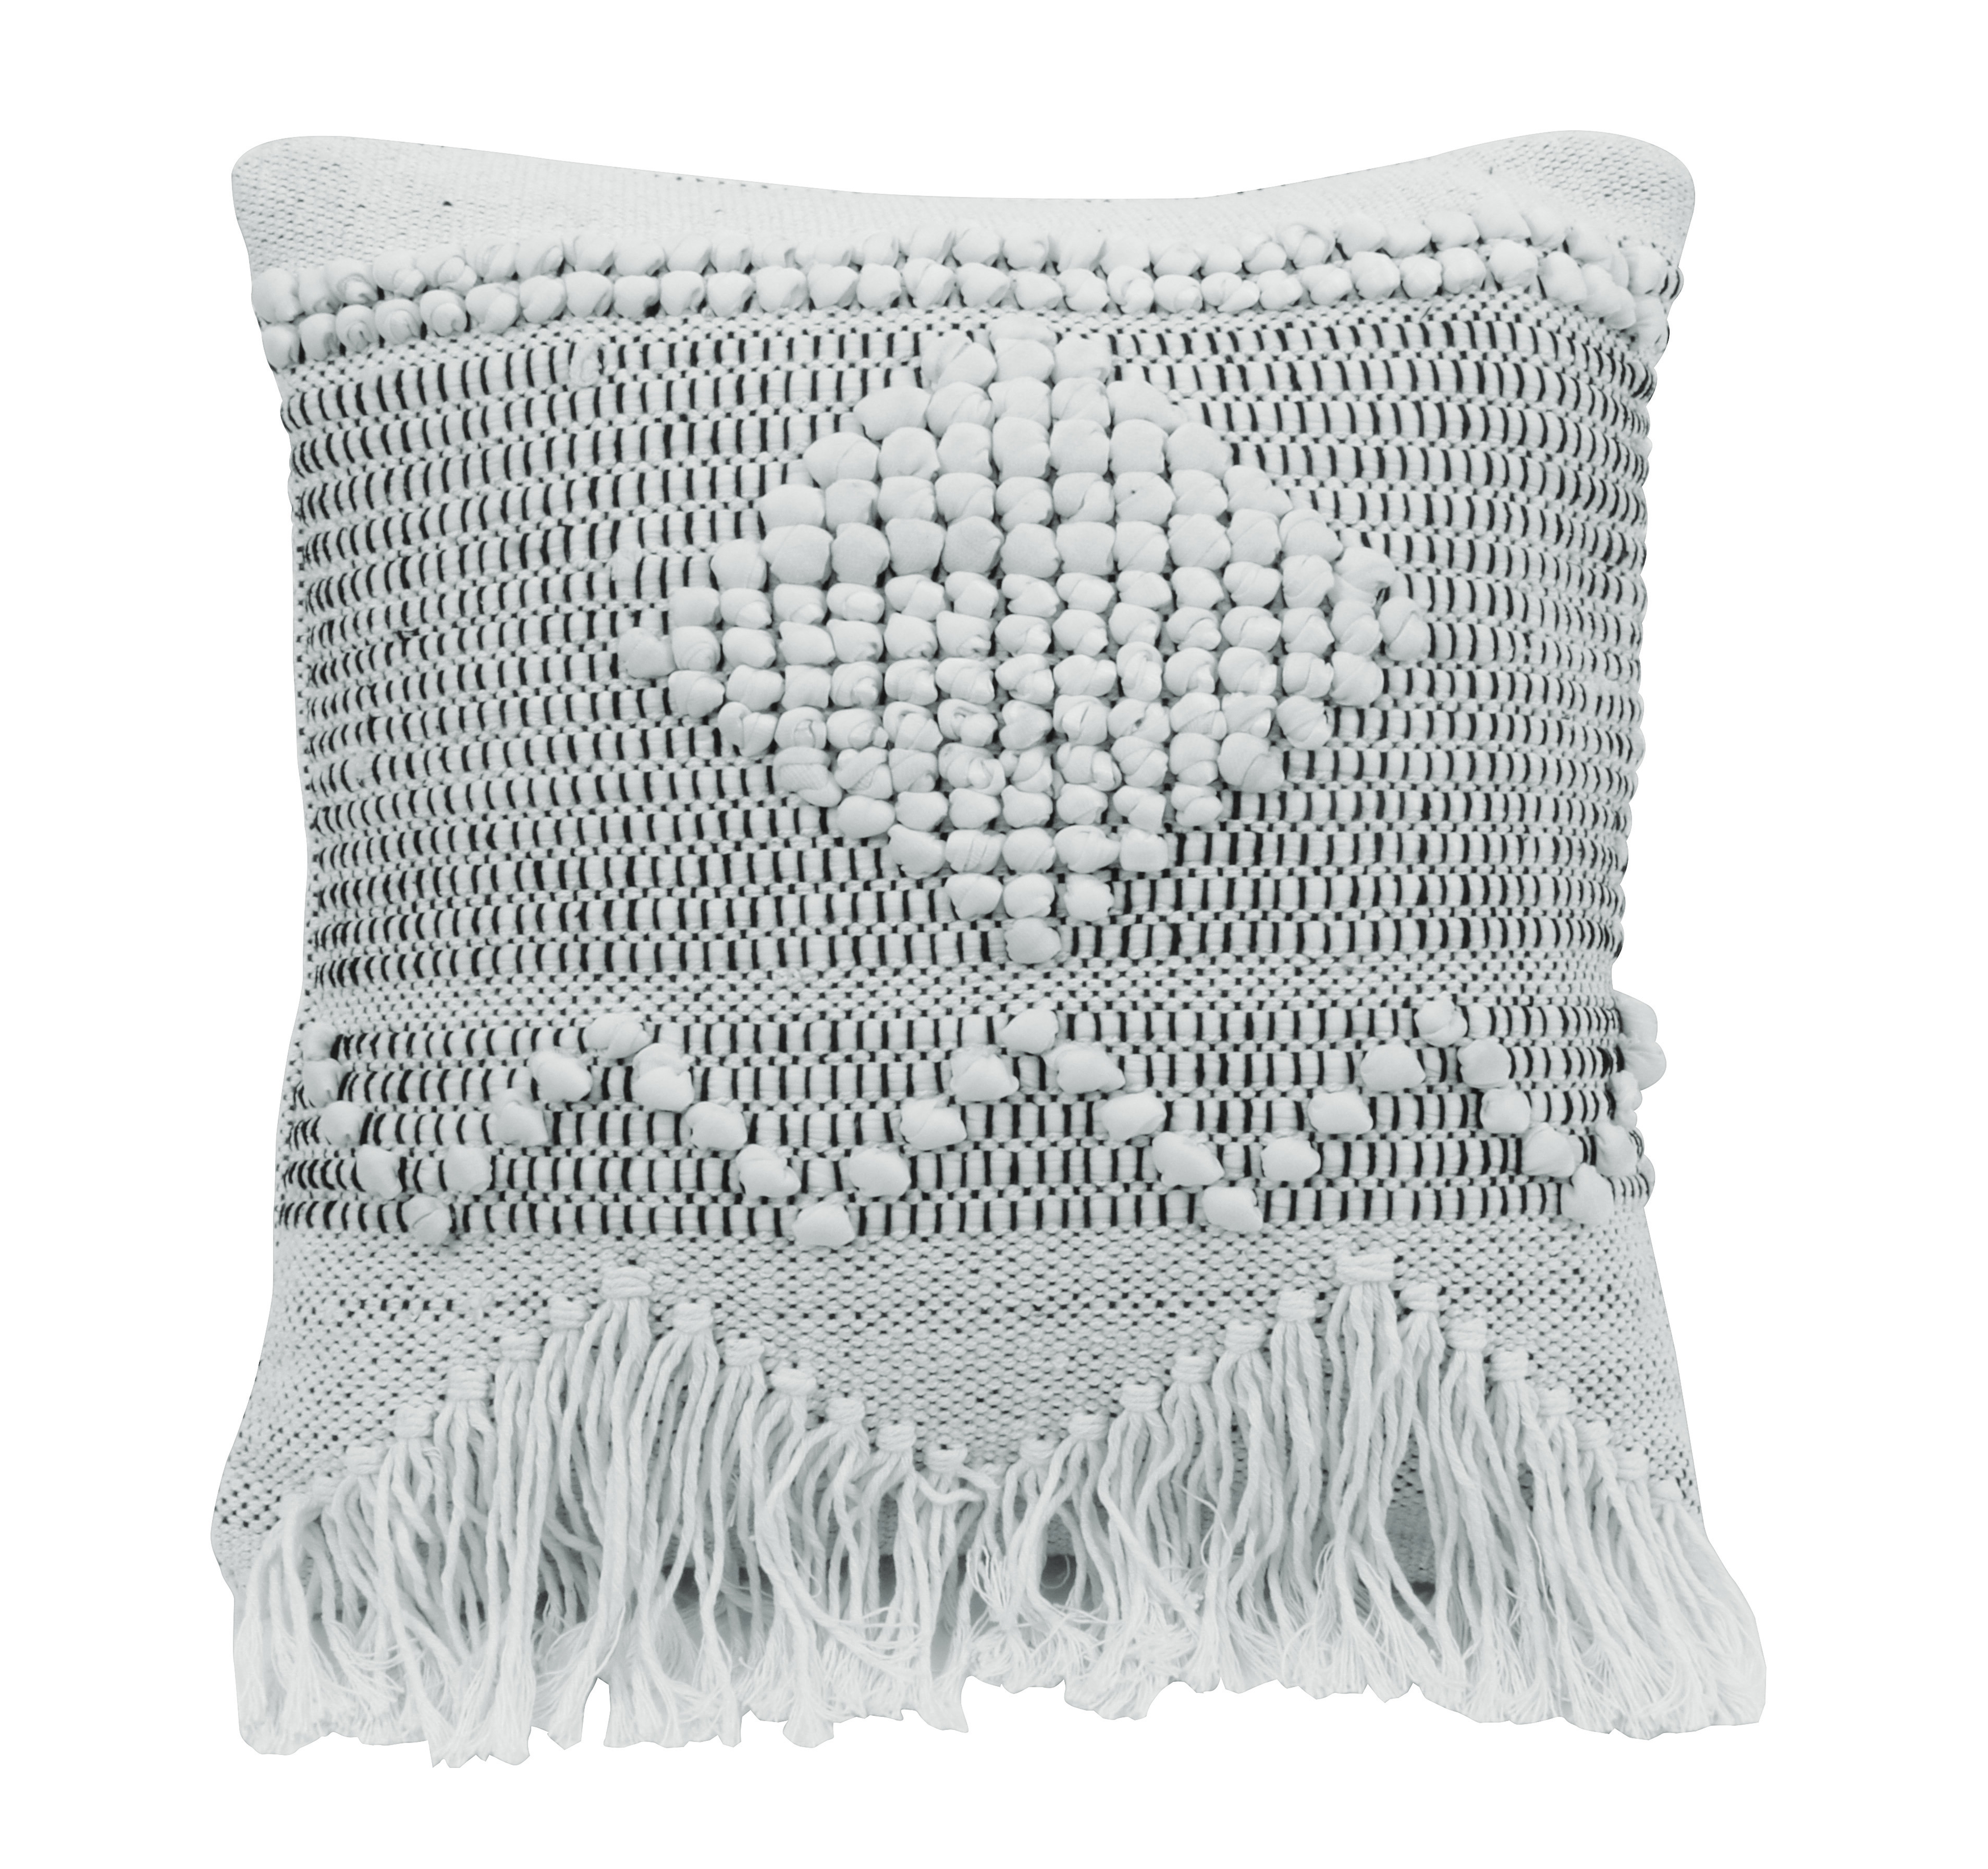 Ivory & Grey Square Textured Cotton Pillow - Moss & Wilder